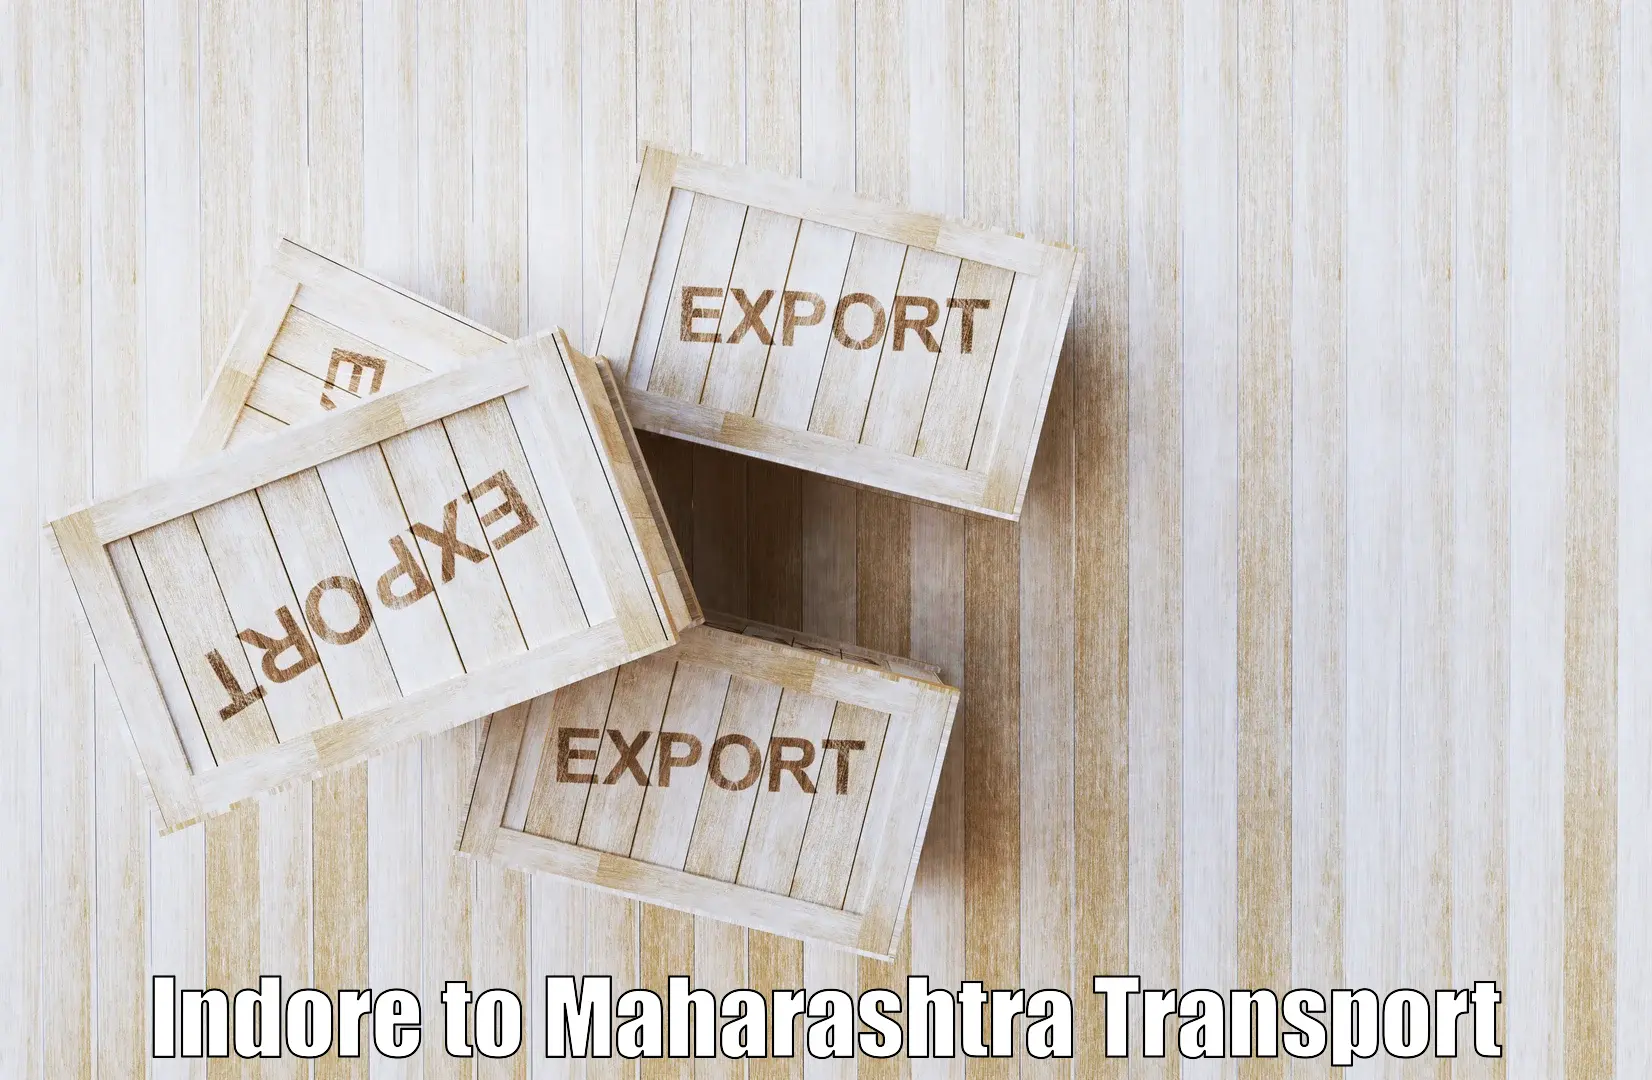 Truck transport companies in India Indore to Nandurbar